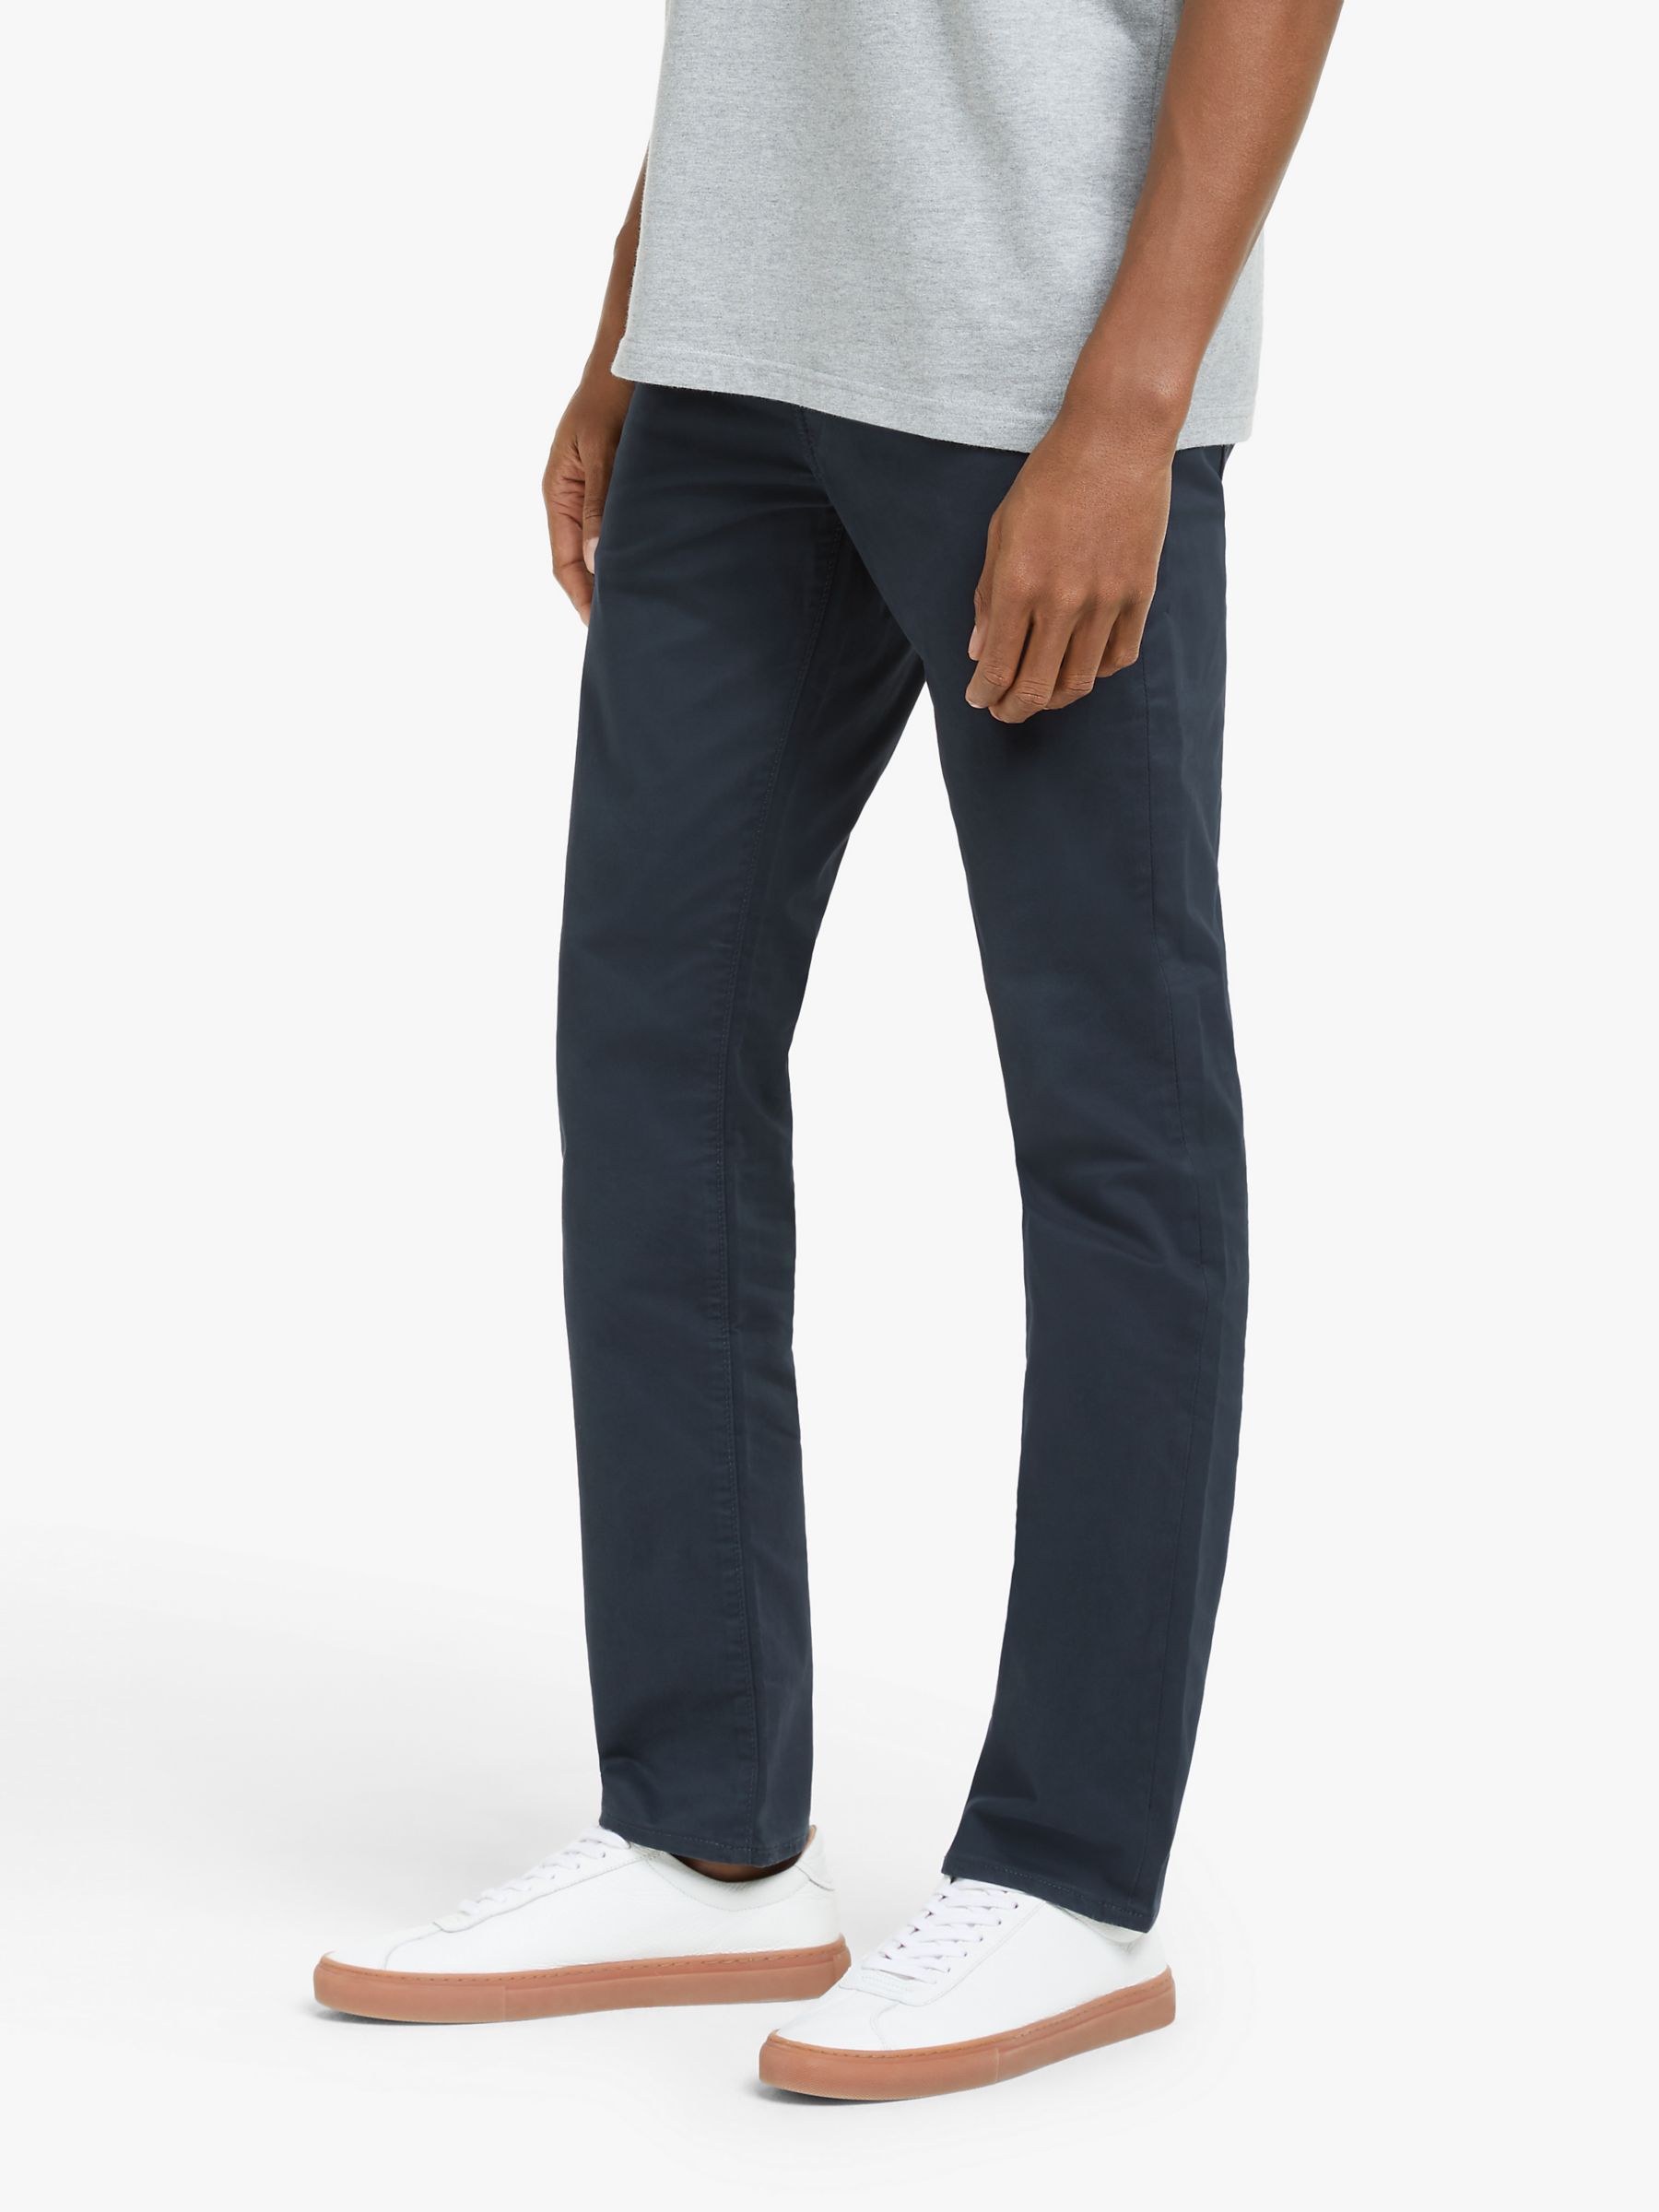 Levi's 511 Slim Fit Chinos, Baltic Navy Sueded